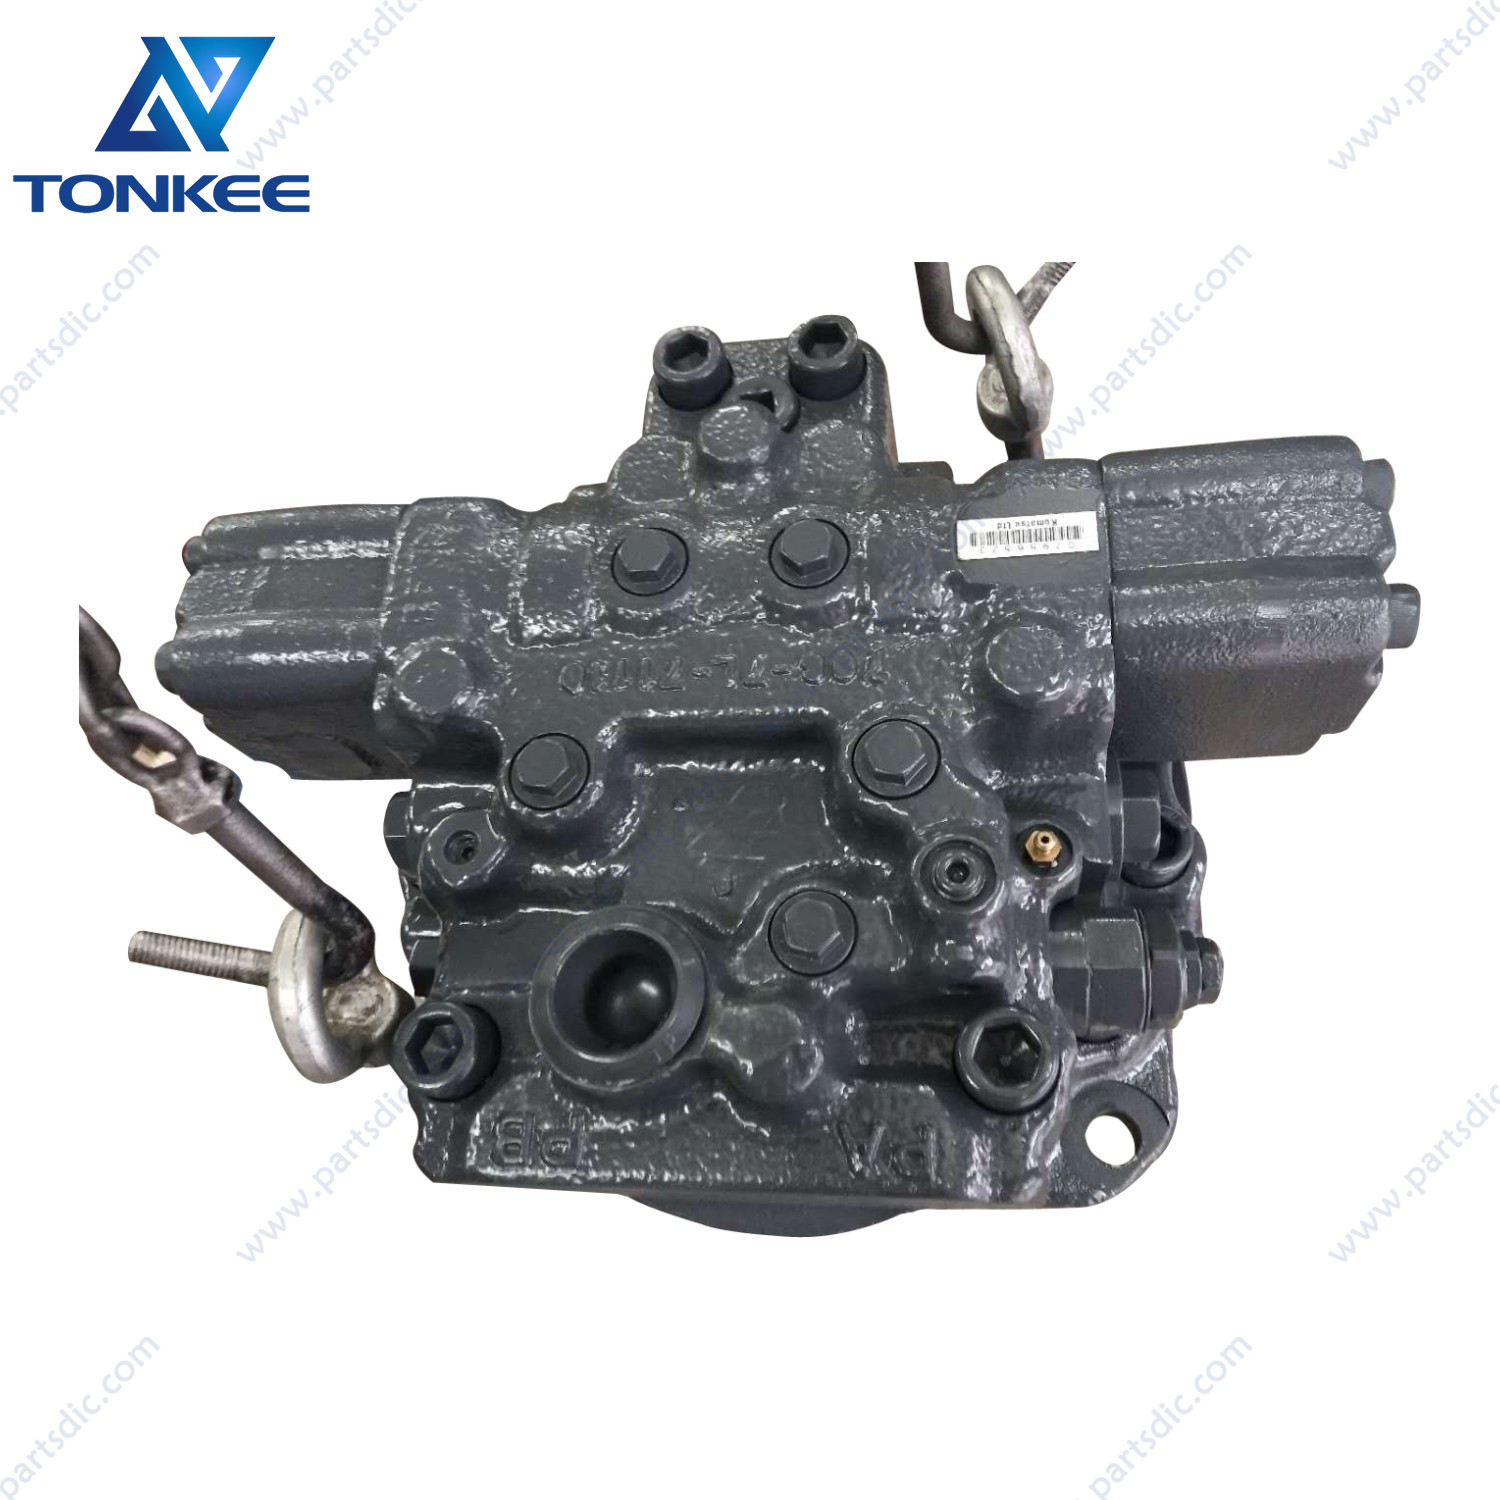 NEW 706-7L-01110 travel motor assy excavator PC2000-8 hydraulic travel motor without final drive for KOMATSU excavation